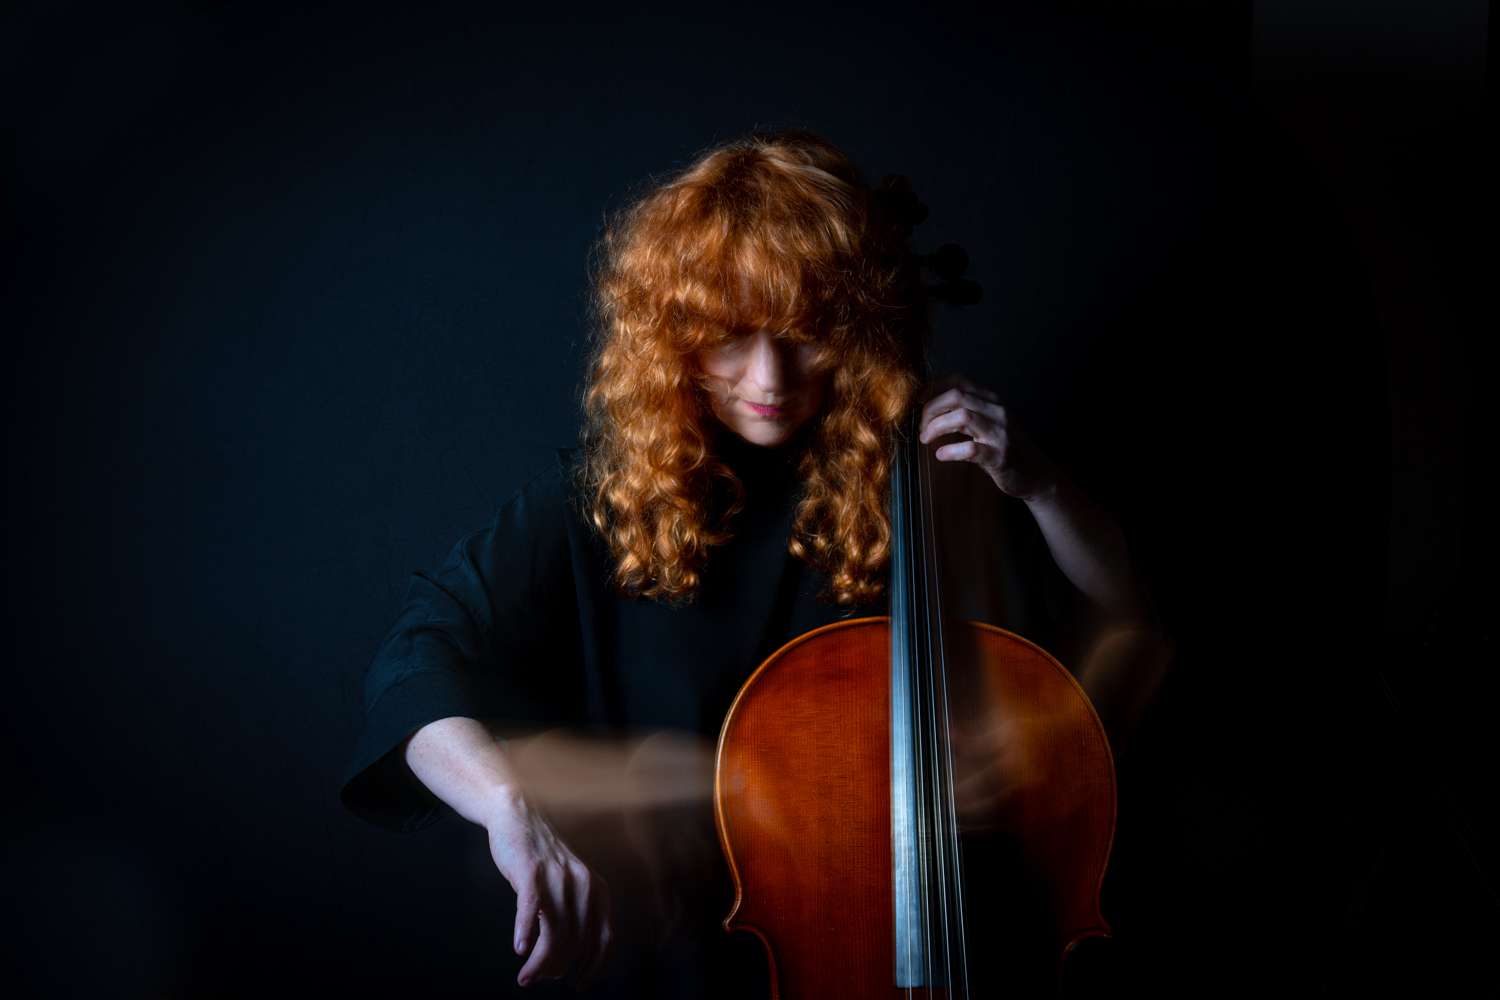 A red headed woman plays a cello